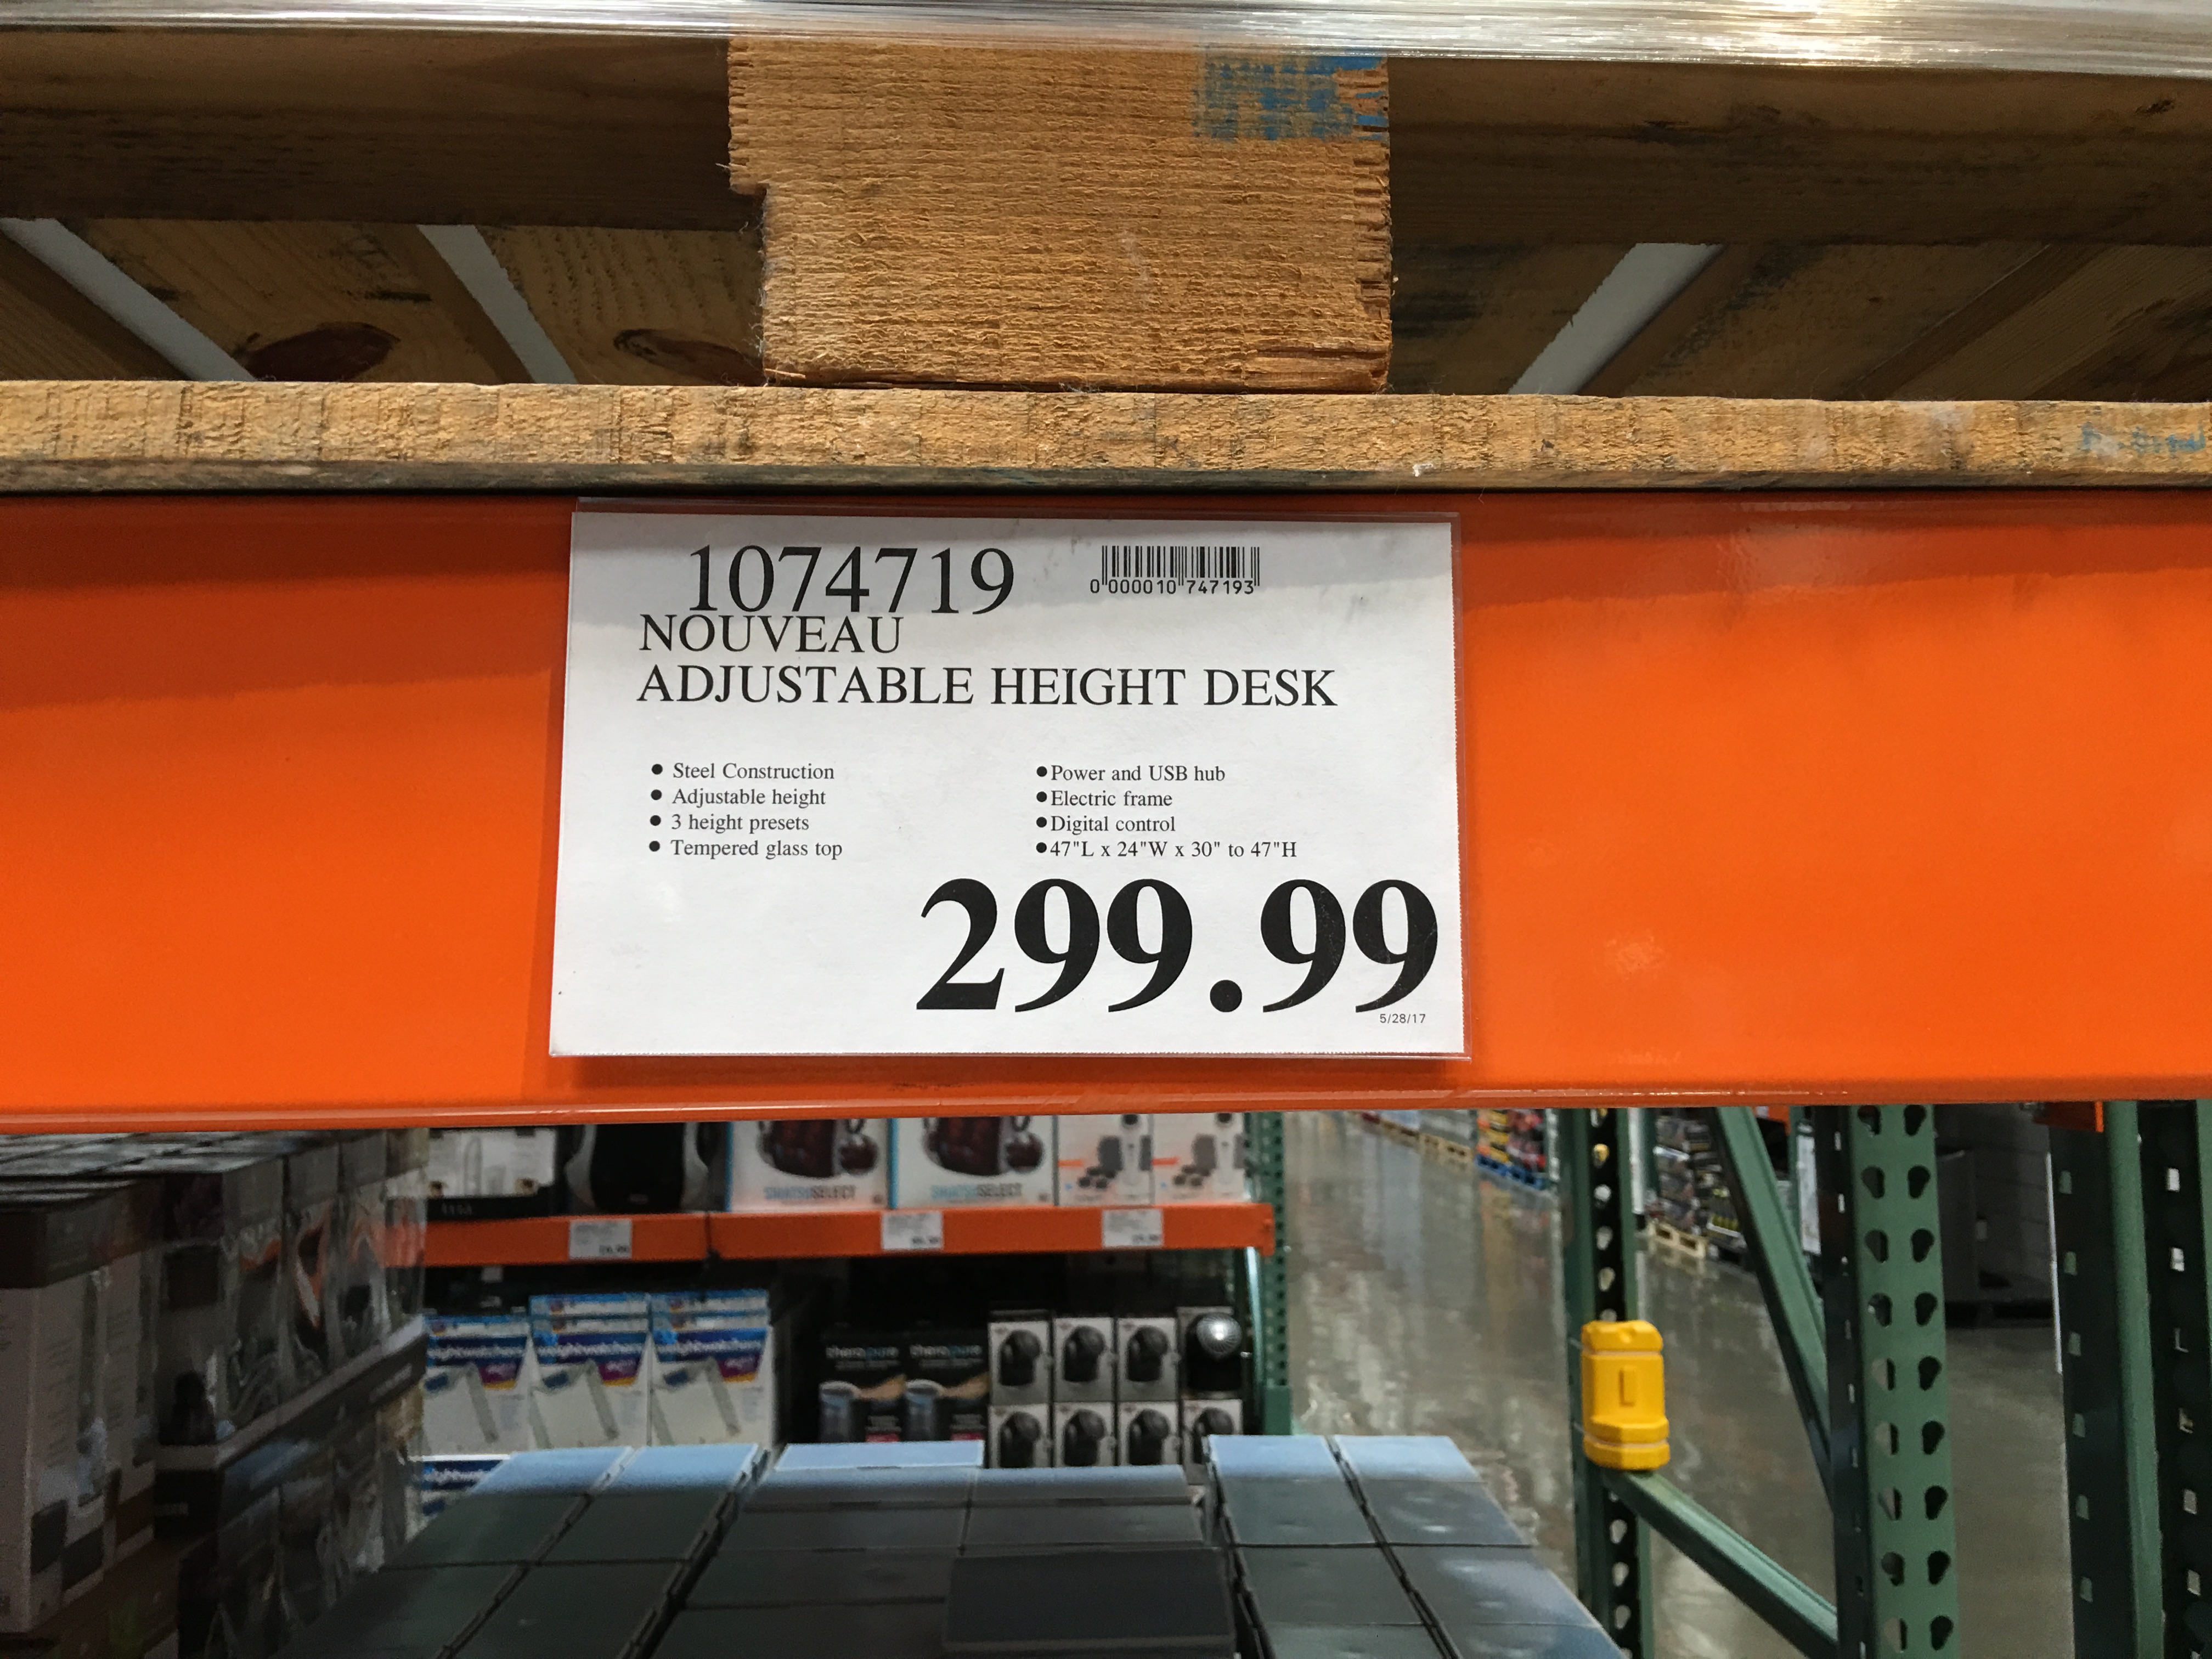 Adjustable Height Desk With Touch Controls 299 99 Costco Bm